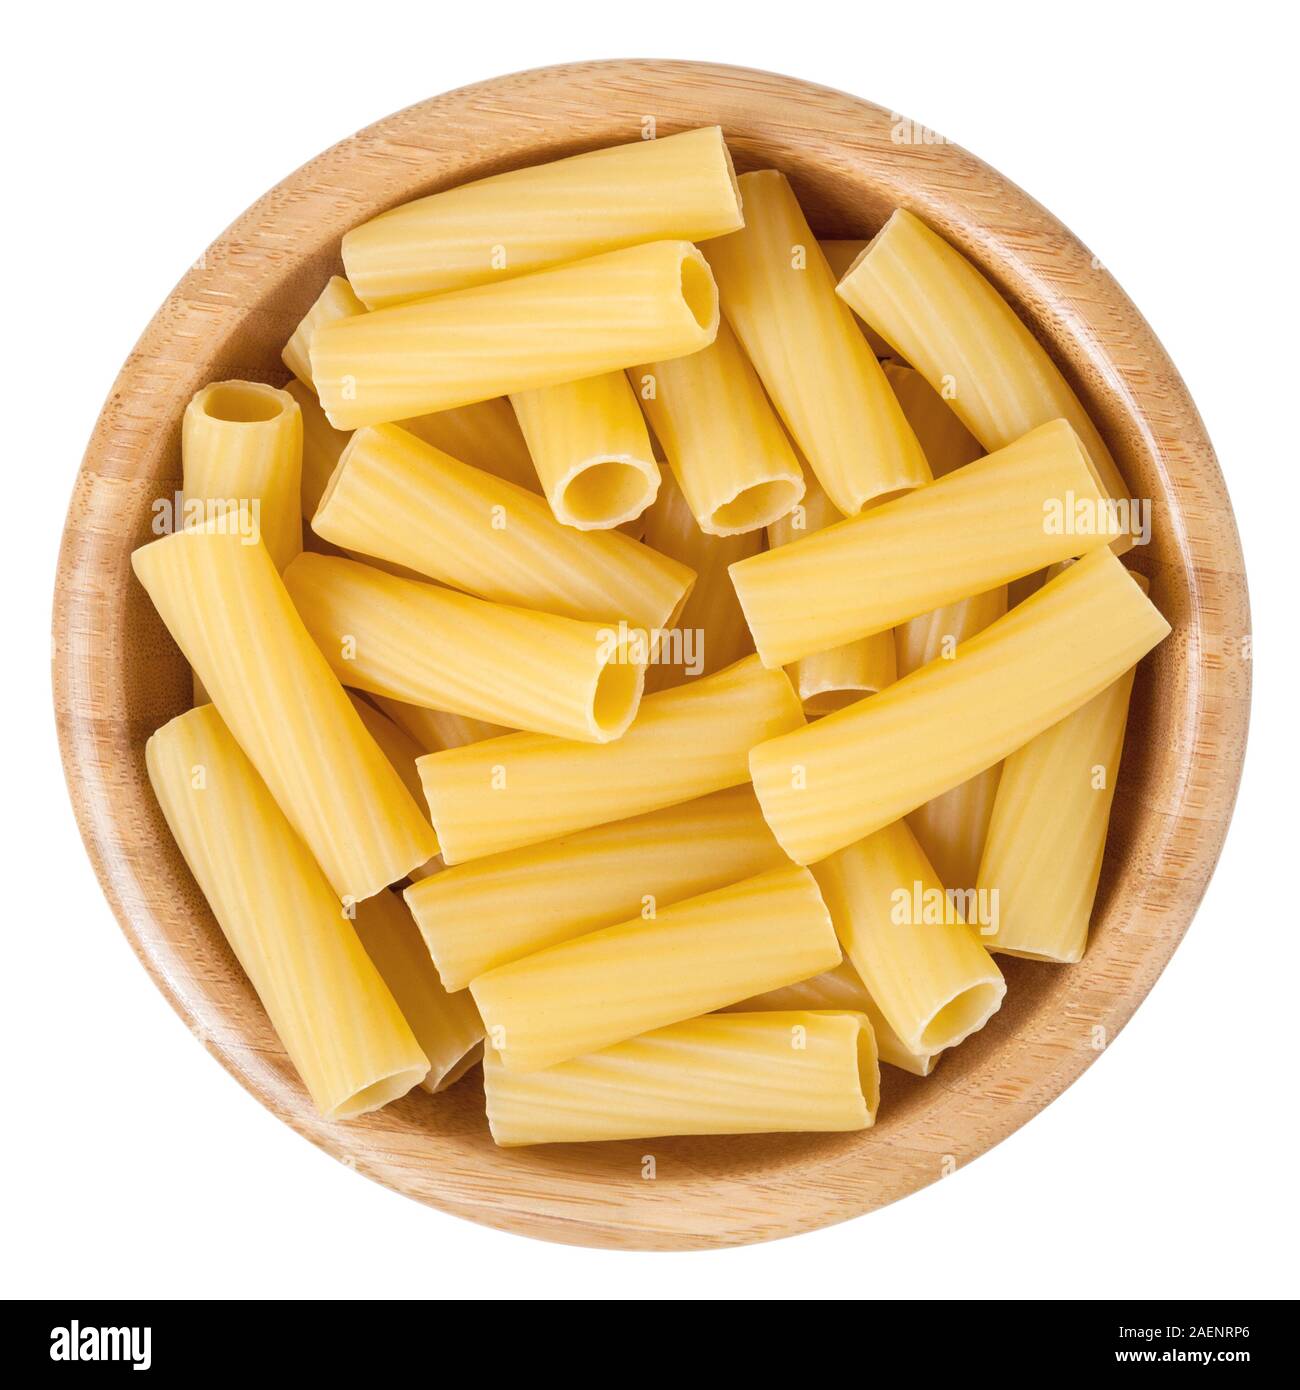 Rigatoni pasta in wooden bowl isolated on white background Stock Photo